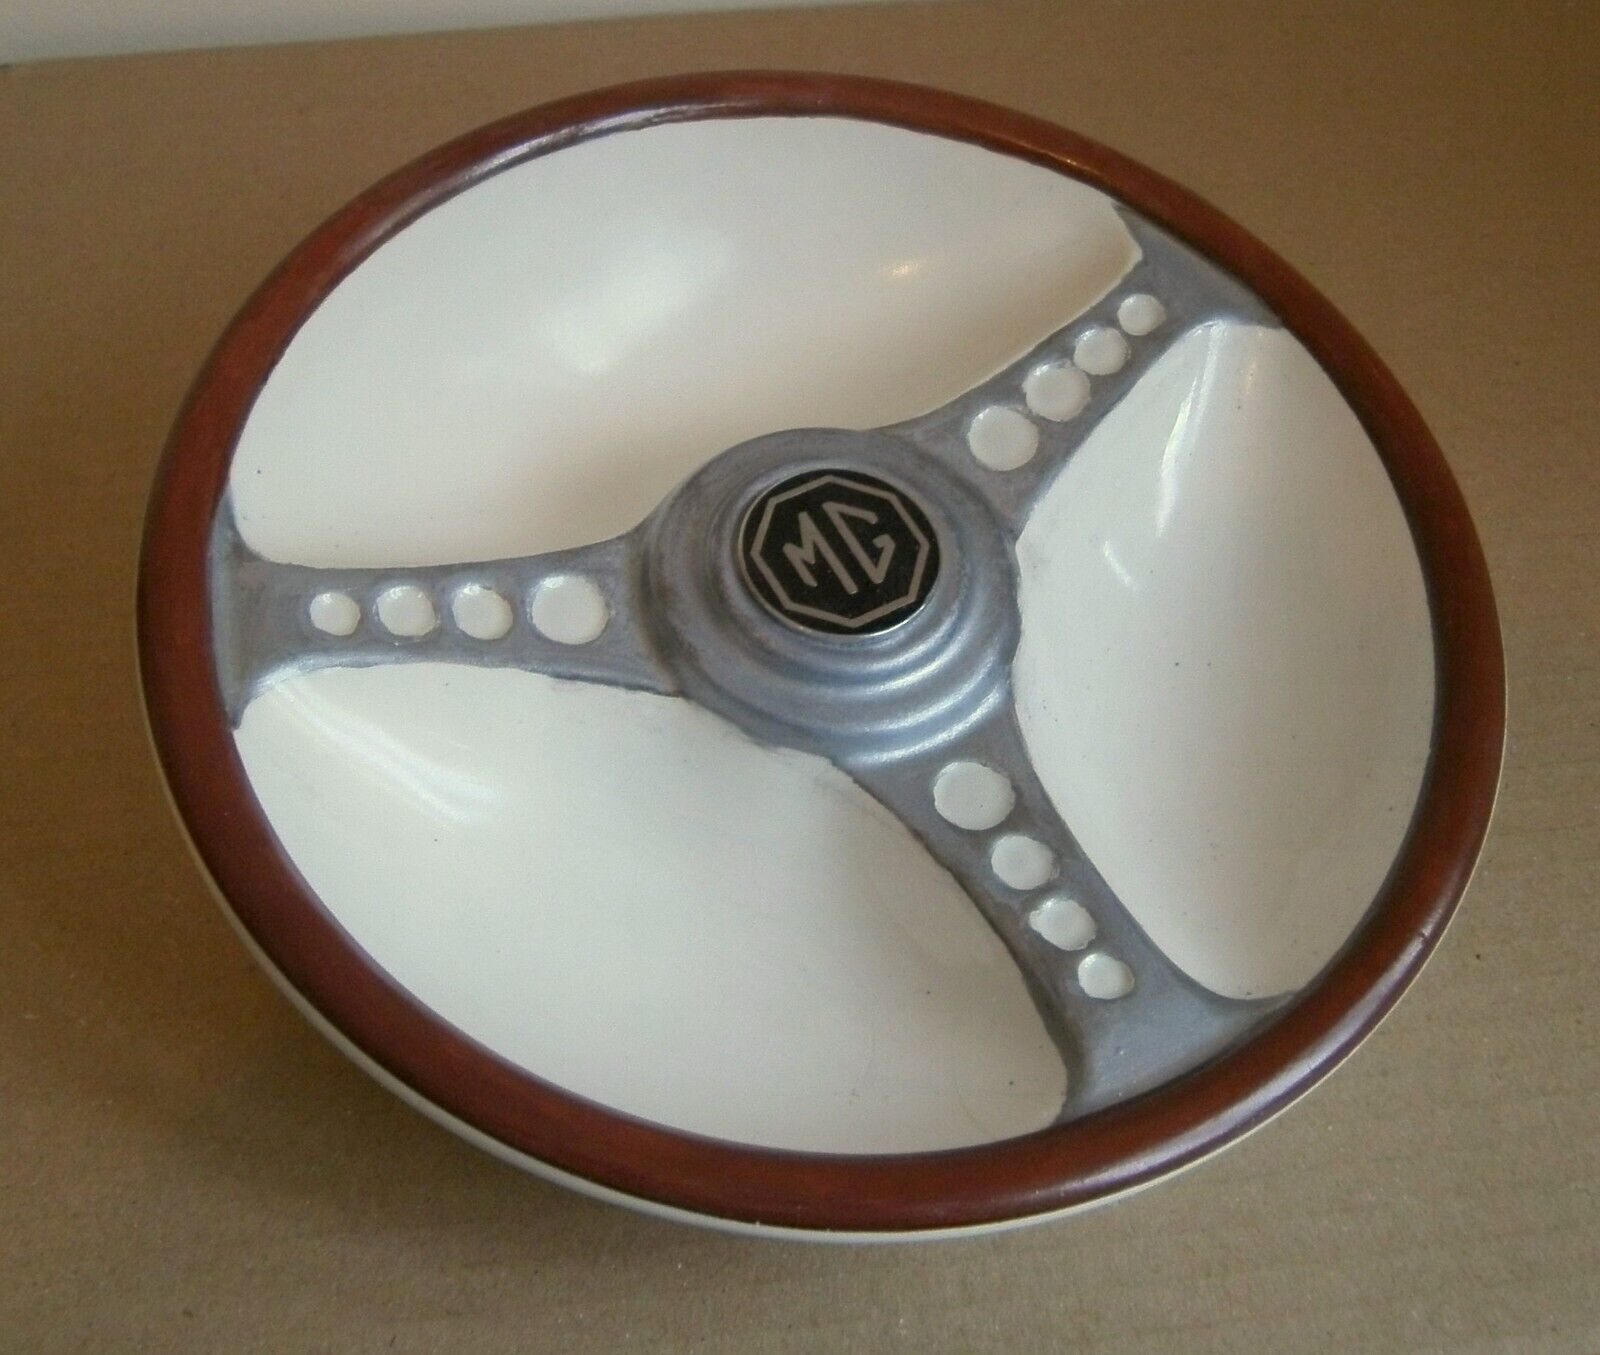 Vintage 1960,s  Les Leston MG Steering Wheel Ashtray by Beswick, good condition.